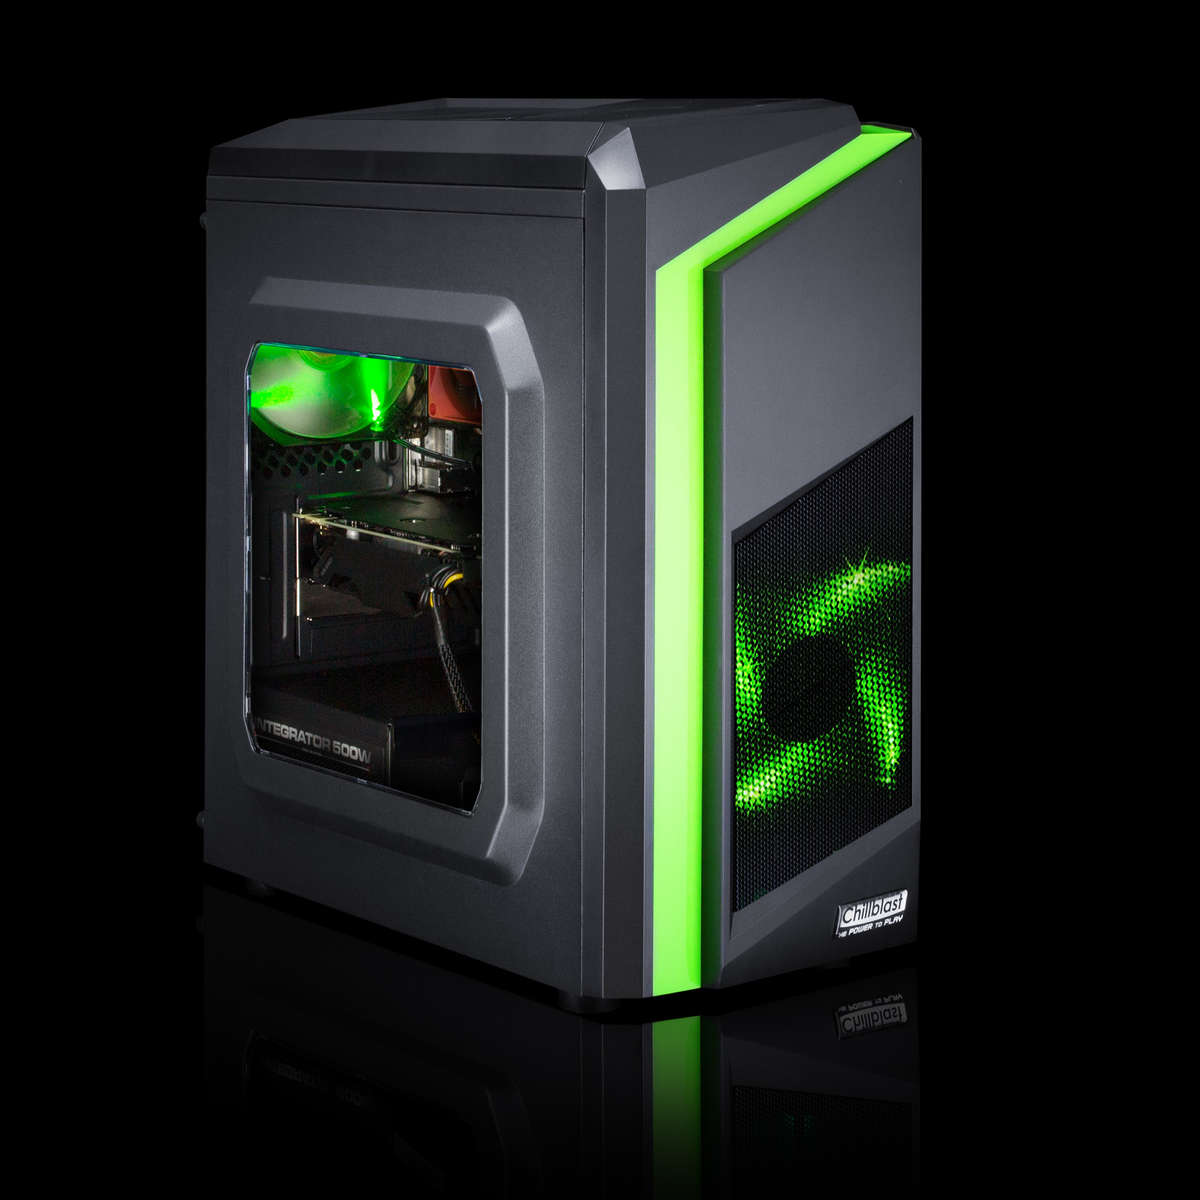 Image of the pre-built Chillblast Luna Core Gaming PC against a dark background.